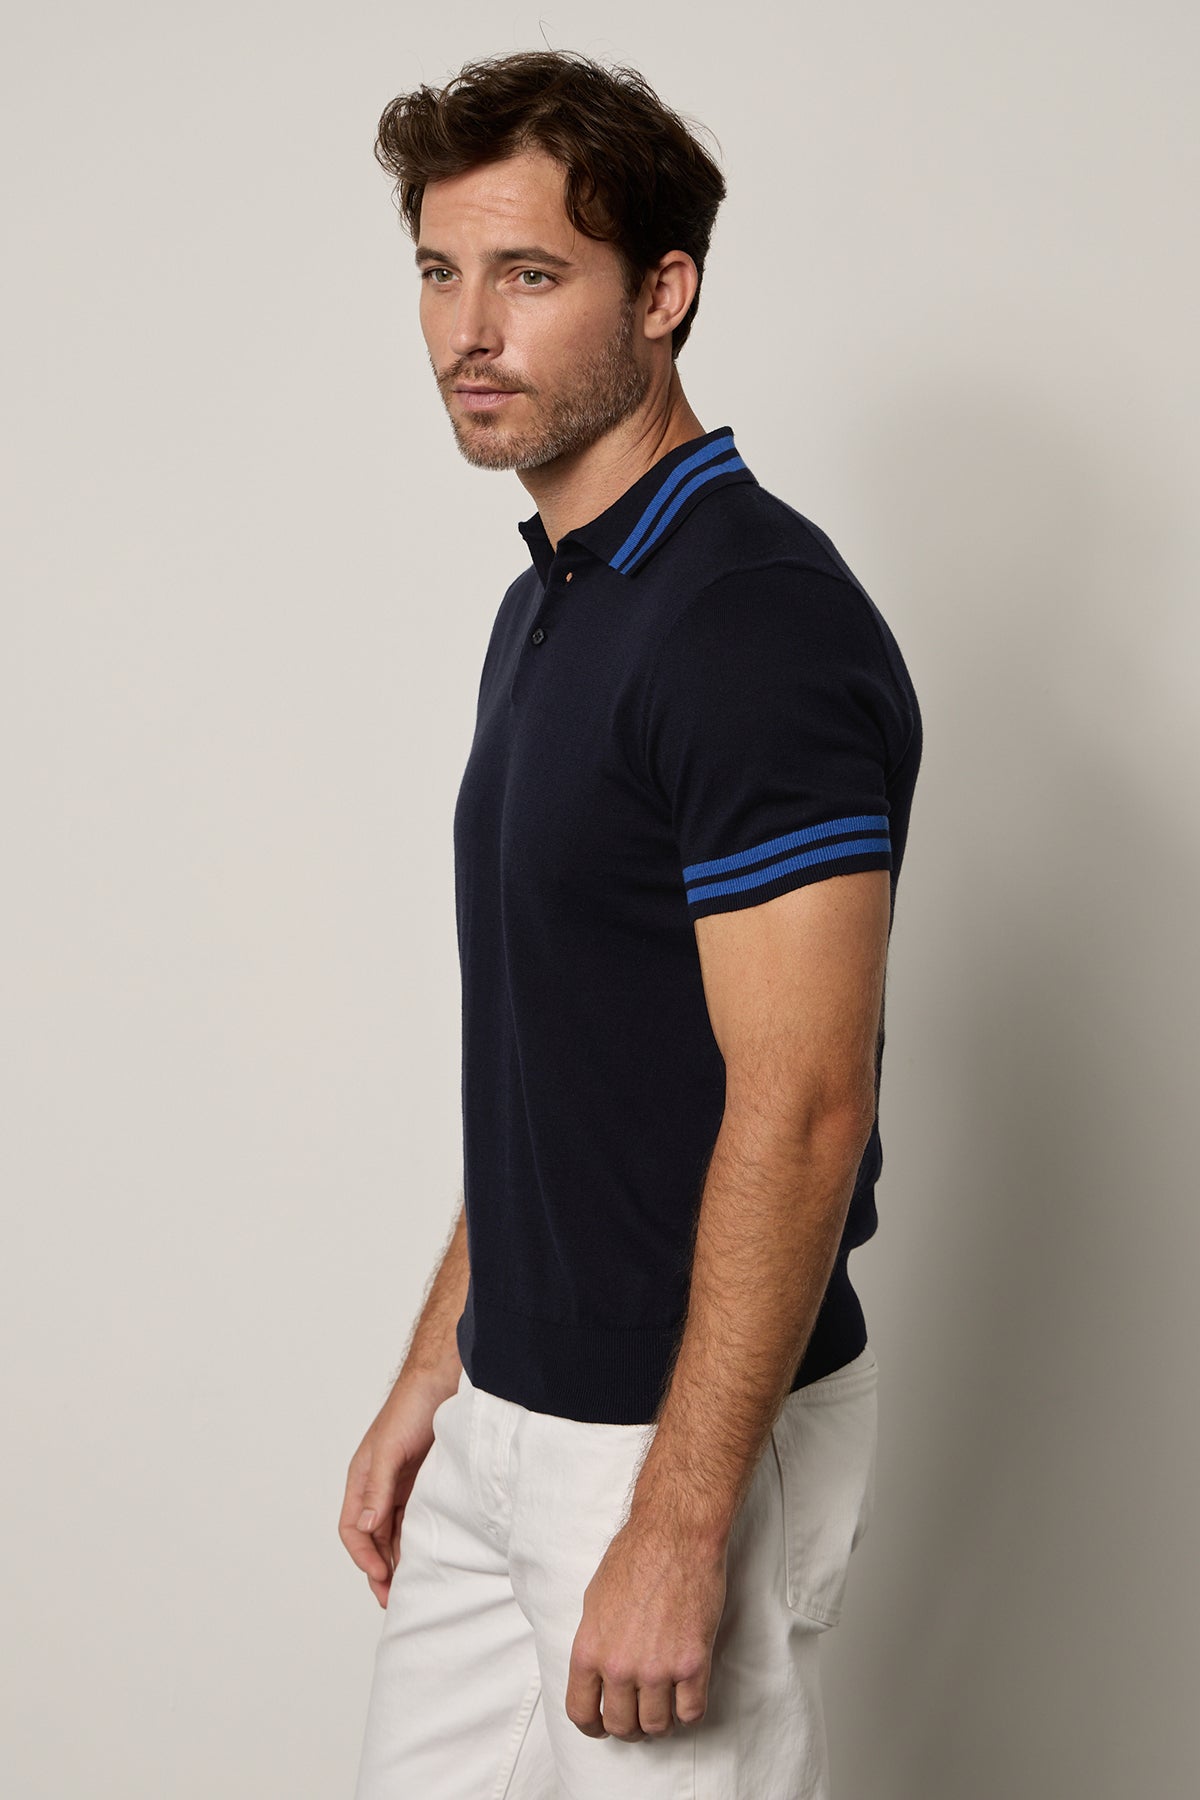   Hogan Polo in navy linen blend with double stripes on collar and sleeves with white denim side 